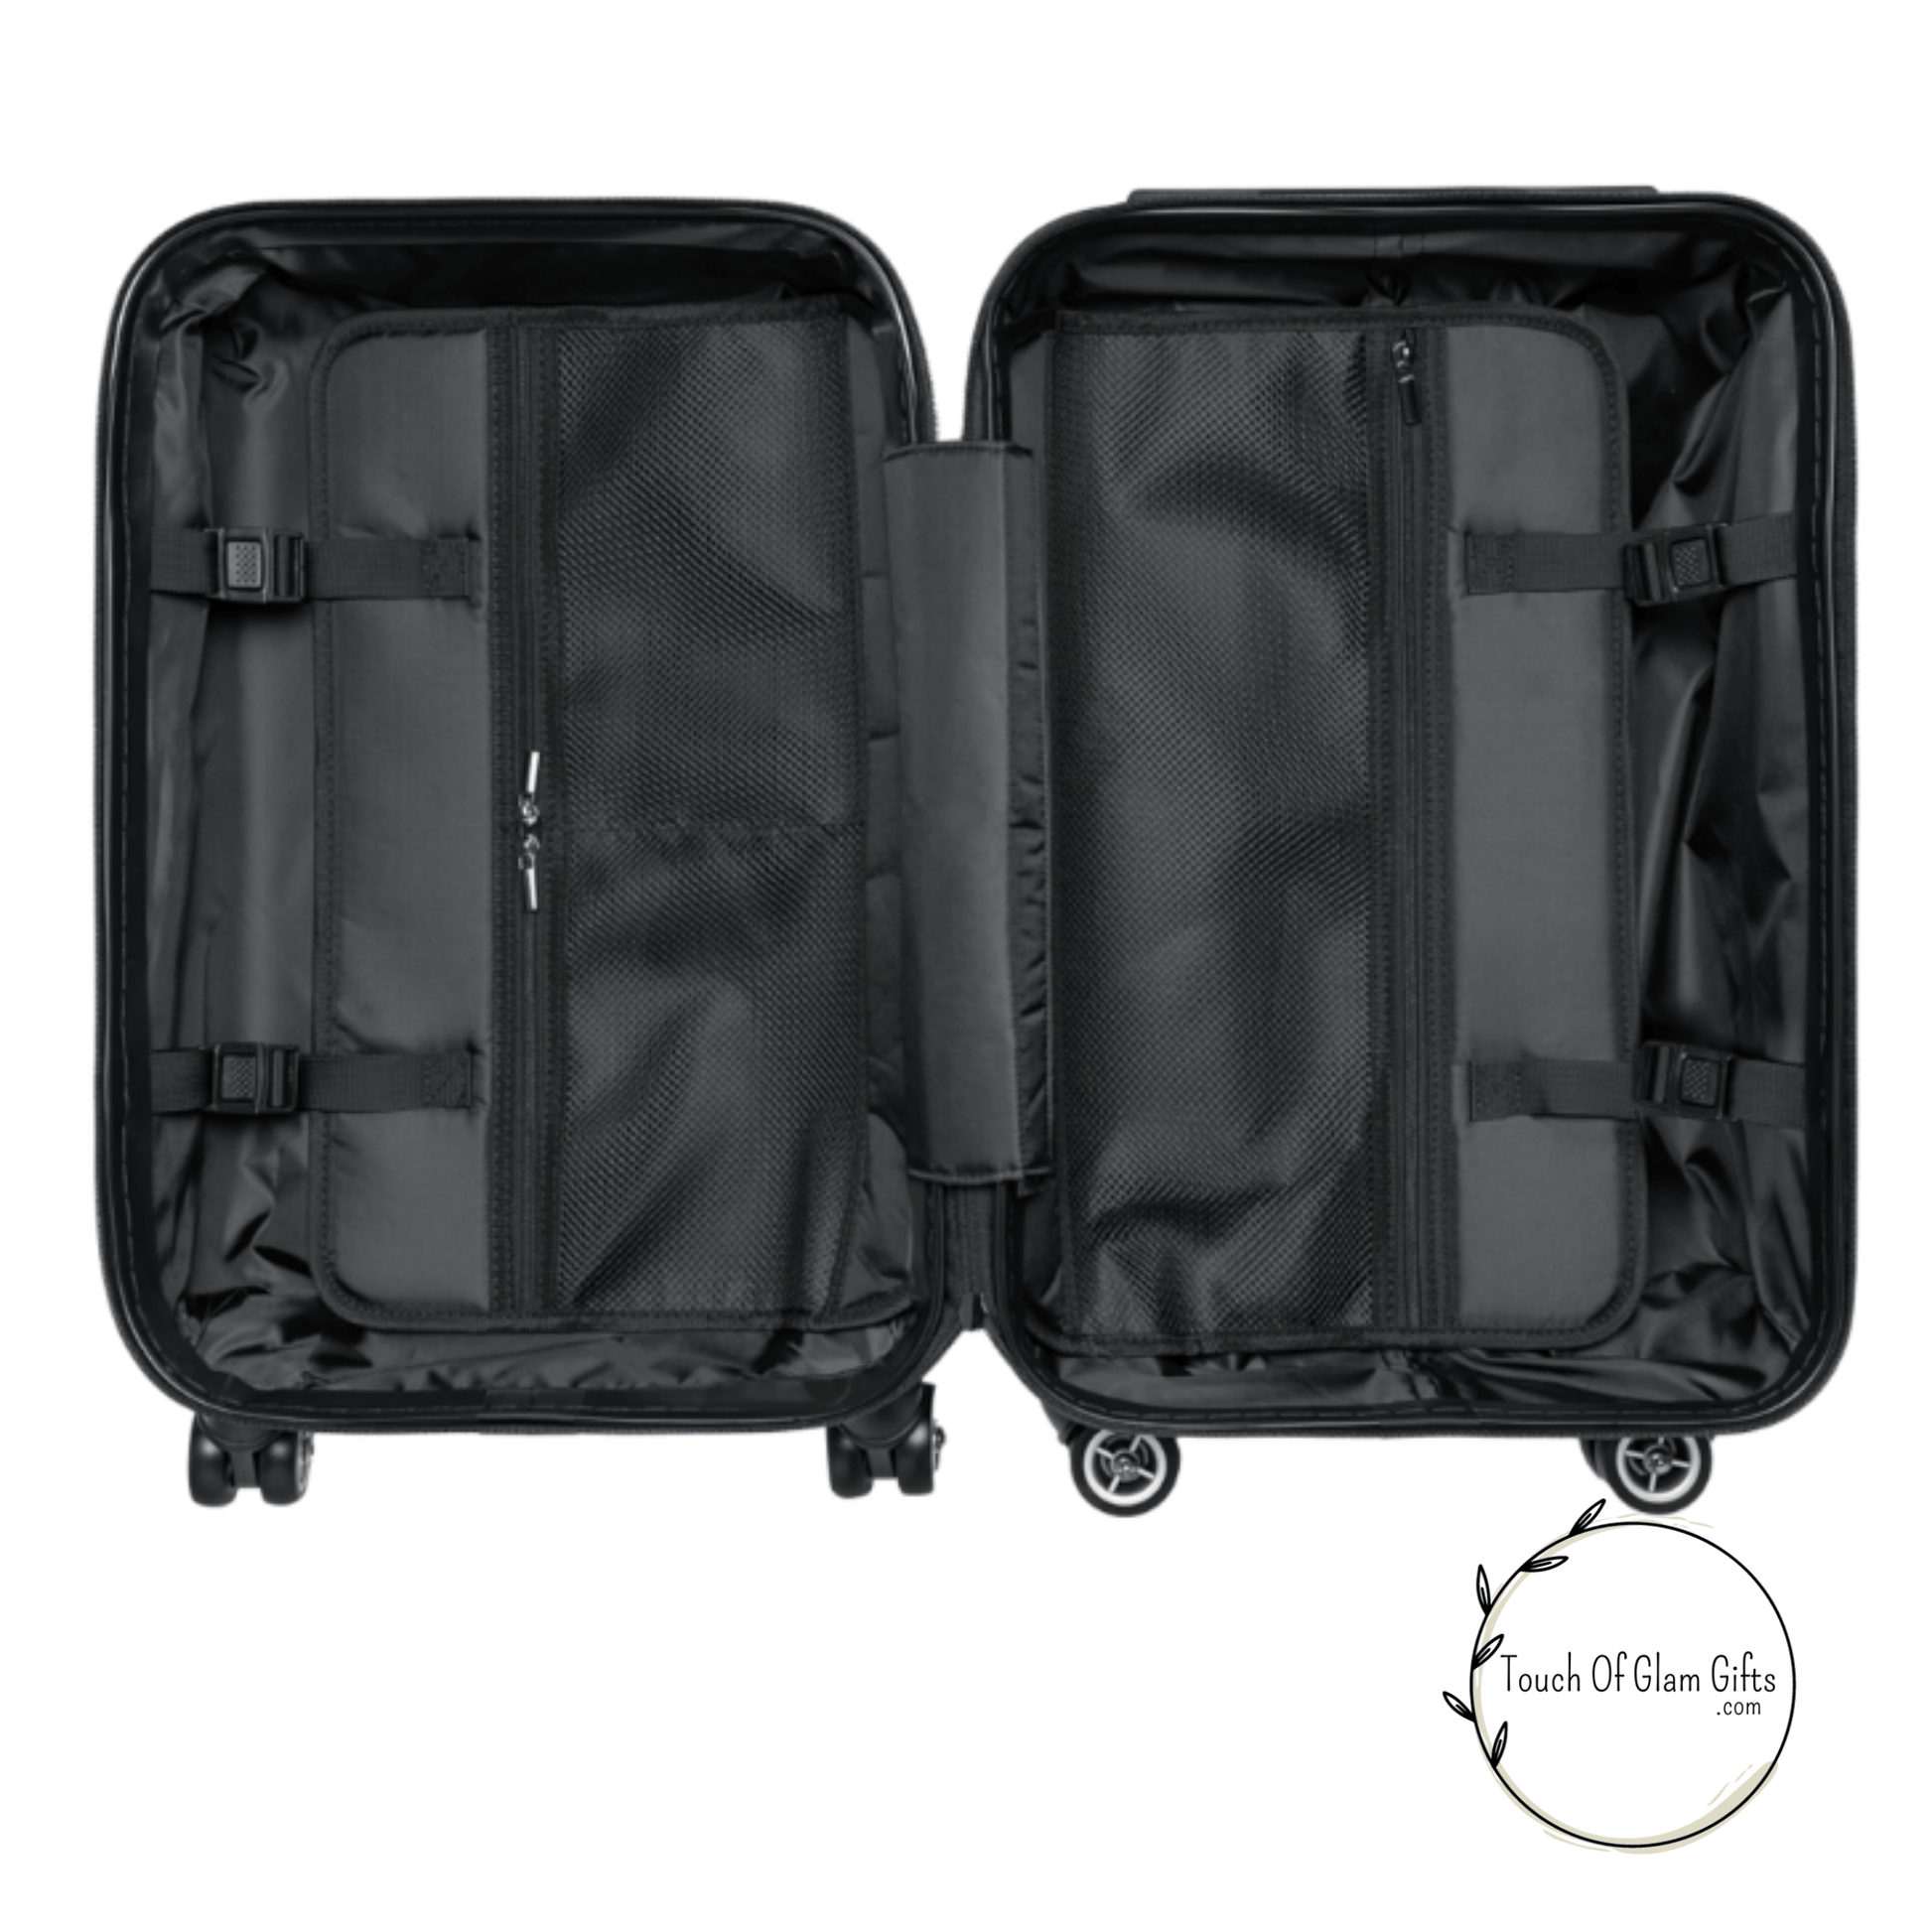 The inside of our hard shell luggage shows when it's opened, both sides have pocket organizers with clips to hold clothes behind it, so it can easily close.